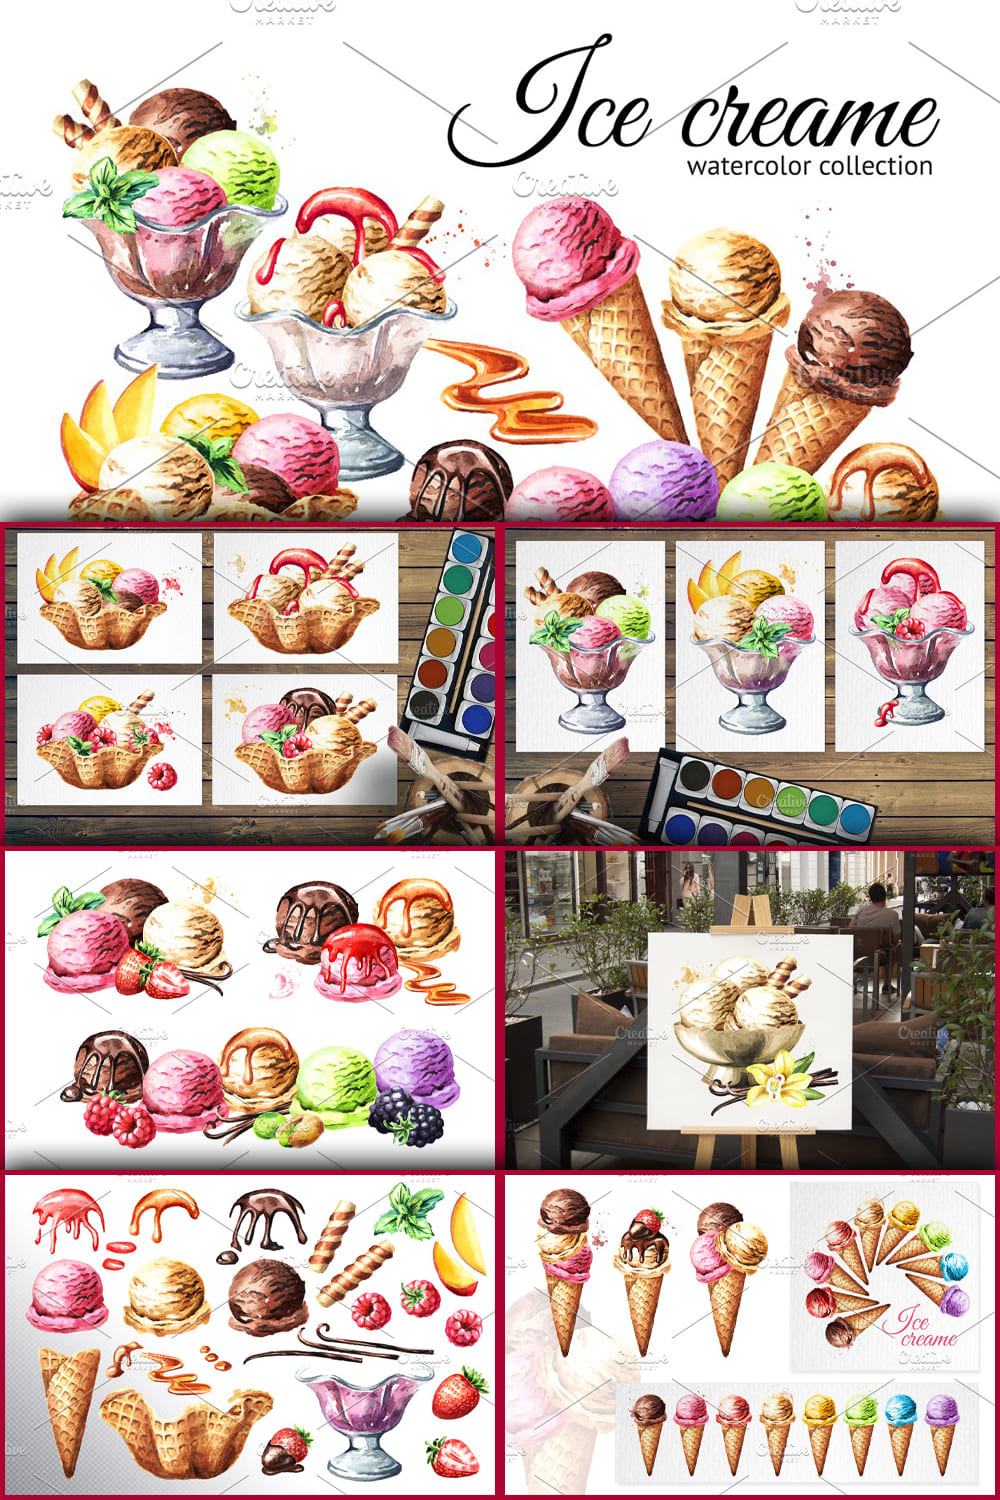 3494368 ice cream watercolor collection pinterest 1000 1500 604